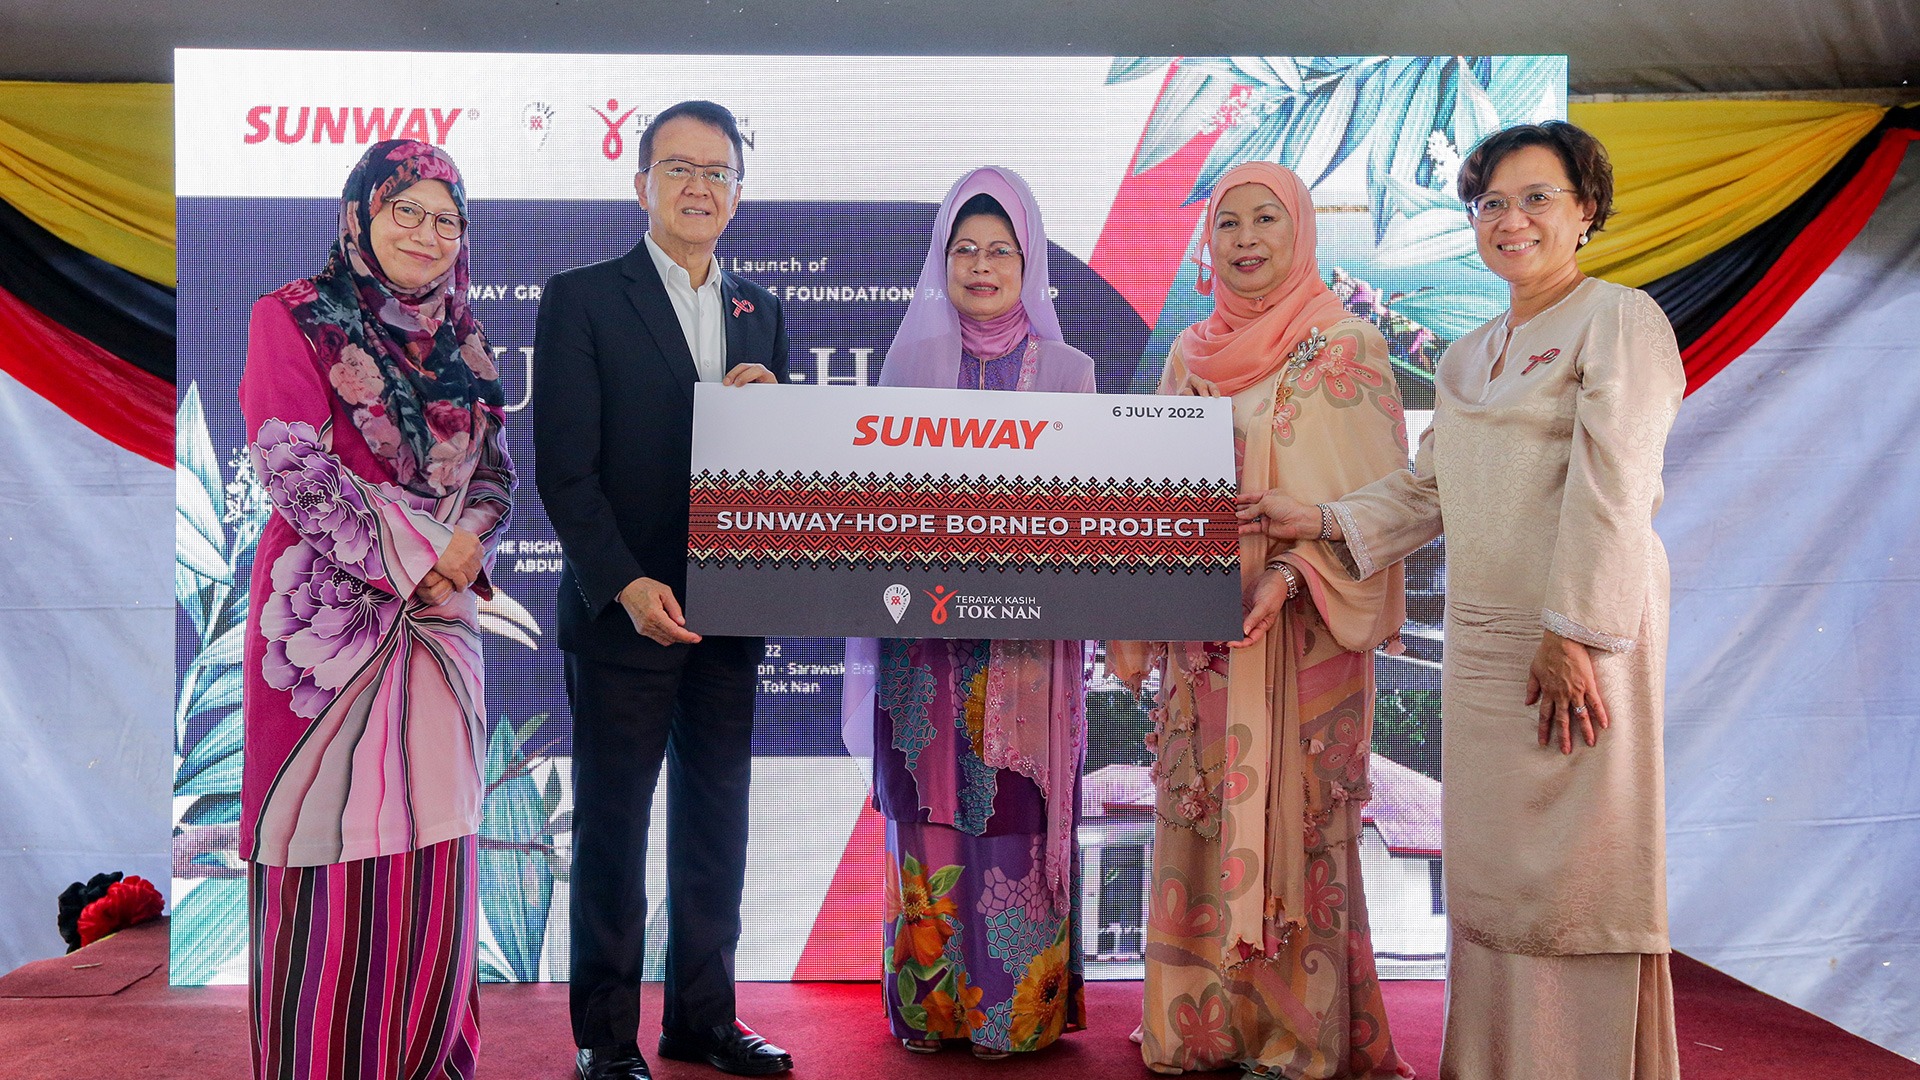 MAF-Sunway Borneo Hope Project Improves Service Deliveries to B40 Community Members Living With HIV in Sabah and Sarawak